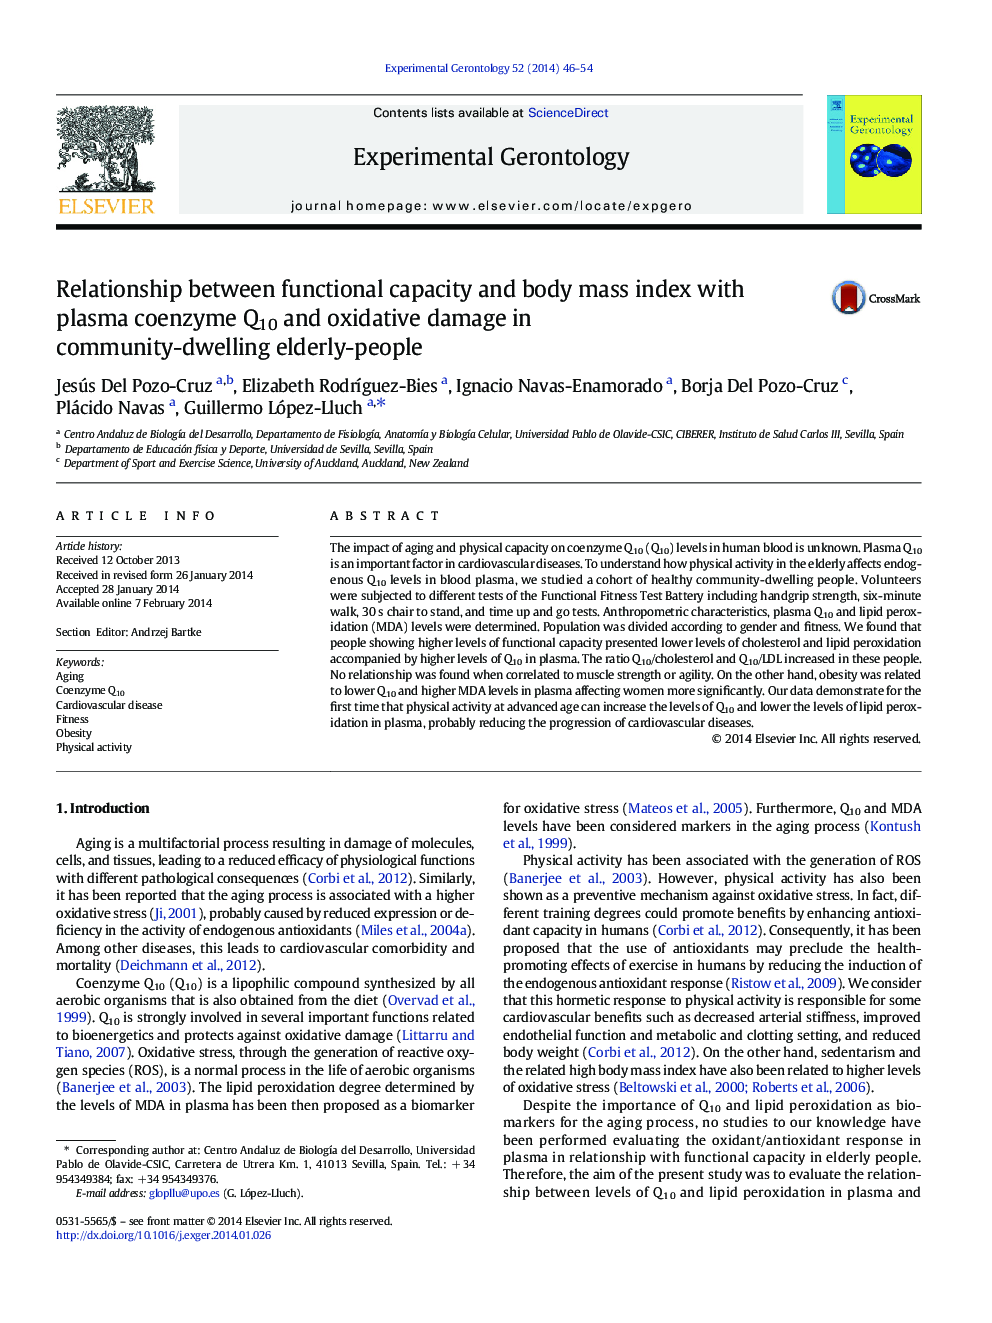 Relationship between functional capacity and body mass index with plasma coenzyme Q10 and oxidative damage in community-dwelling elderly-people